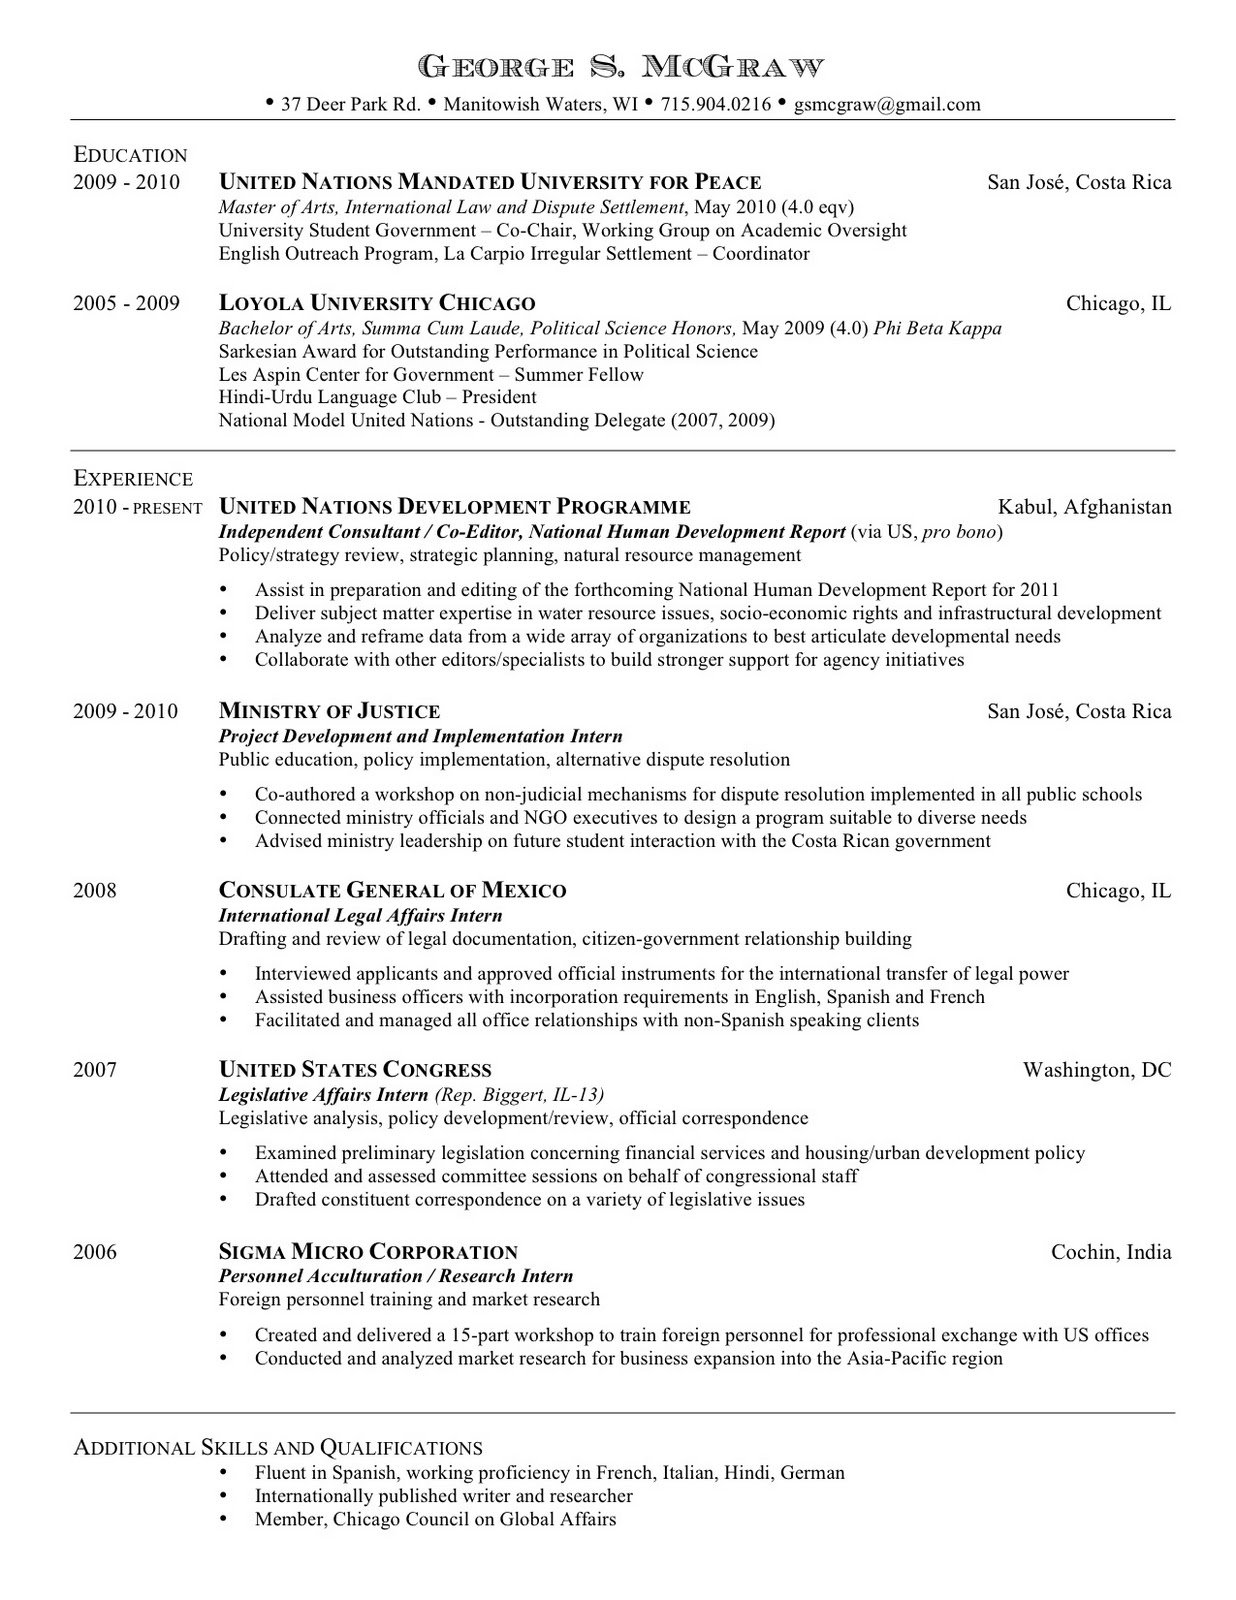 Resume and Publications: Short Resume